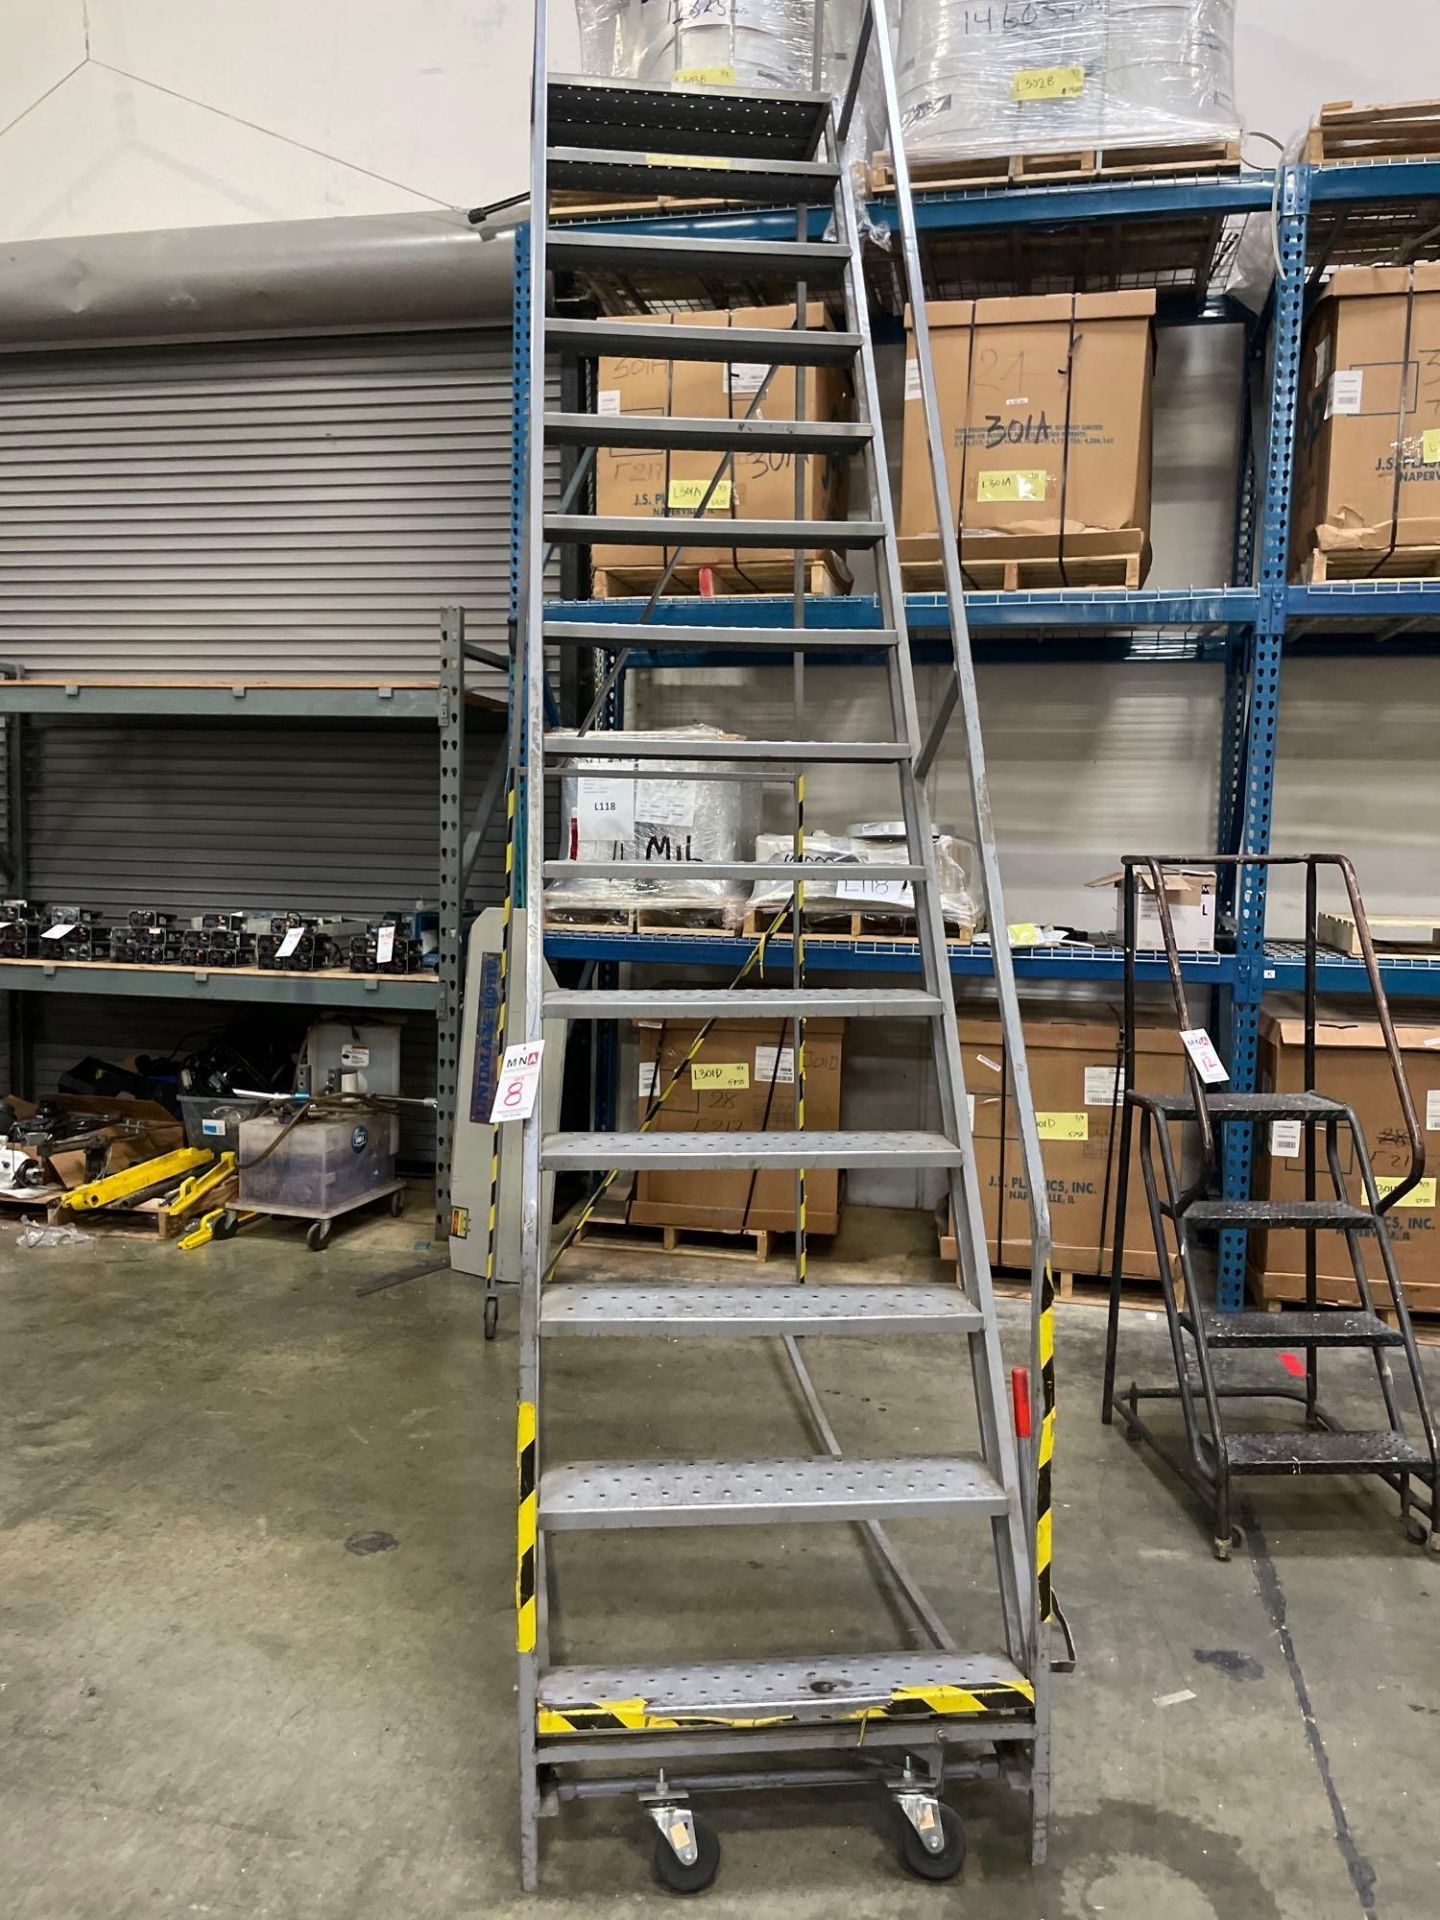 14 Step Rolling Warehouse Ladder - Image 4 of 4